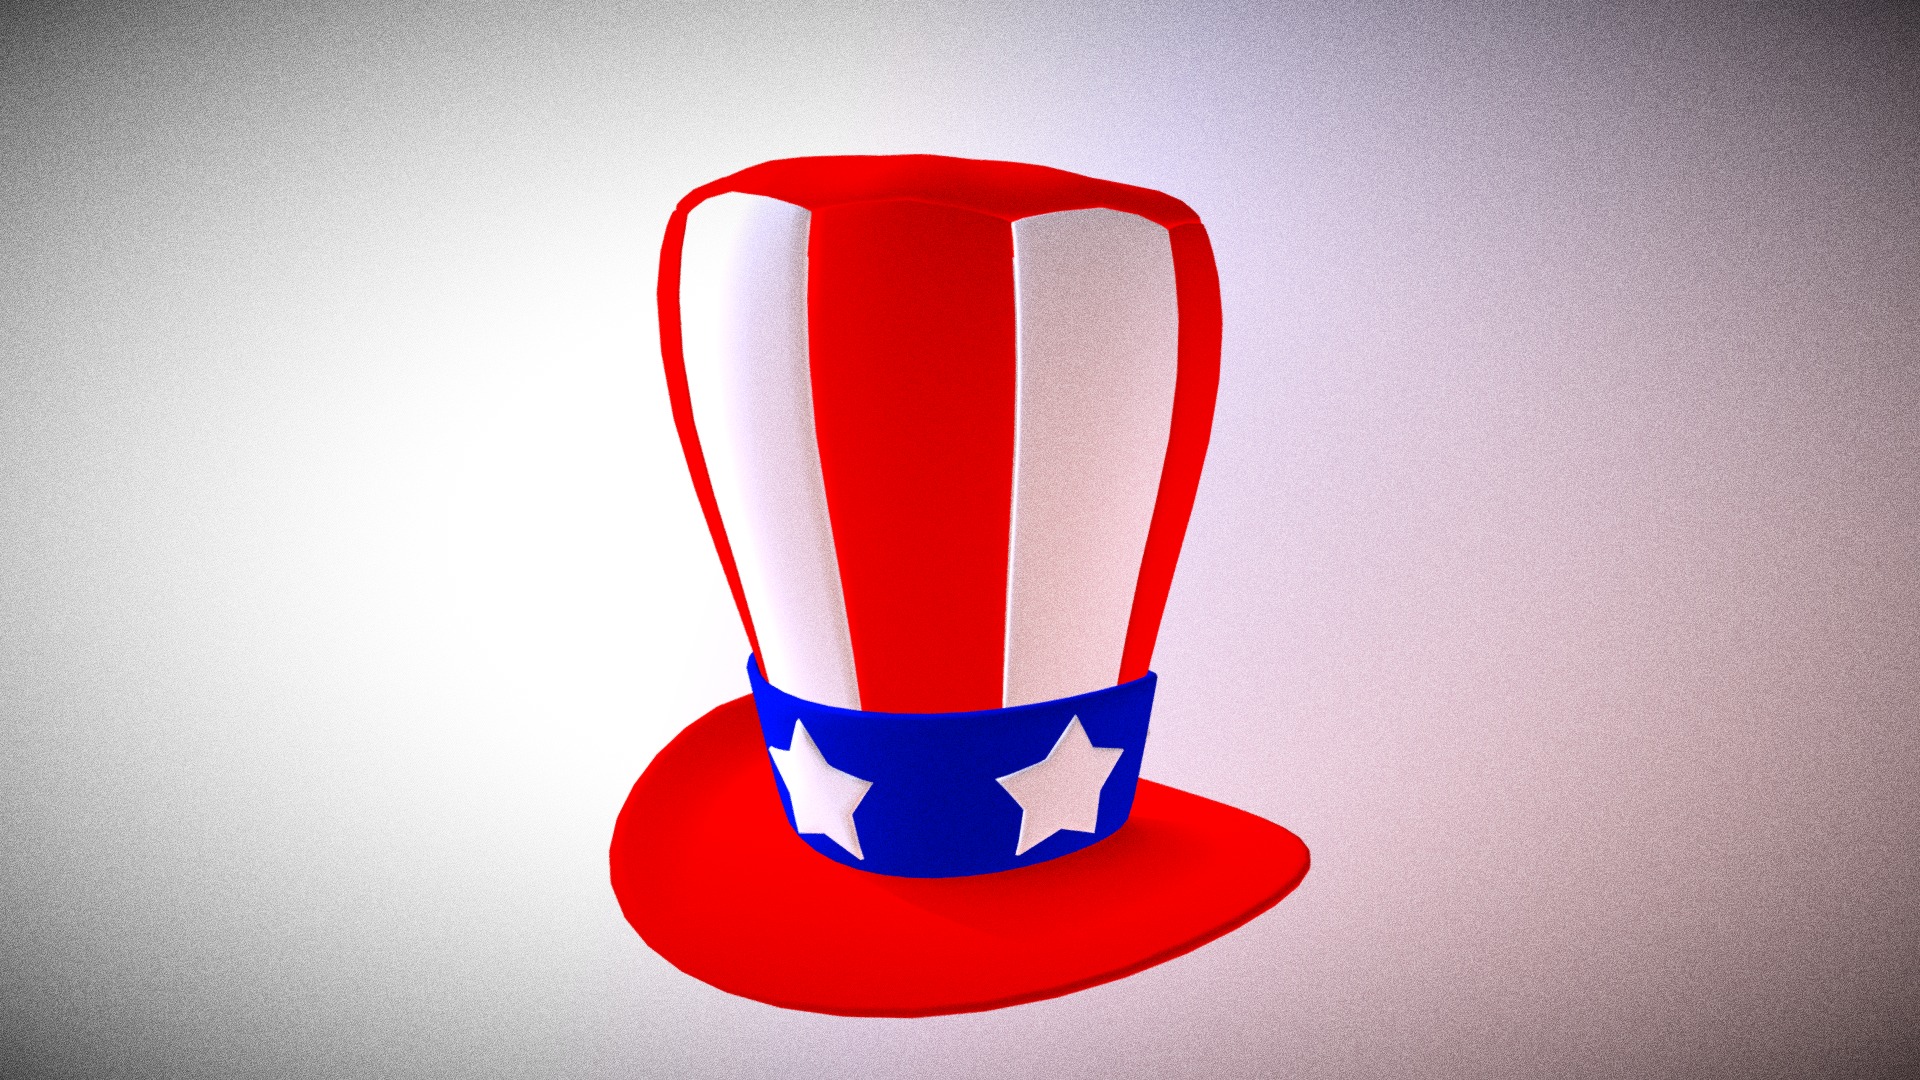 SImple 4th July Hat.

Model was response for this weekly chalenge.
https://www.blendswap.com/requests/view/461 - 4thJuly - Download Free 3D model by AonoZan 3d model